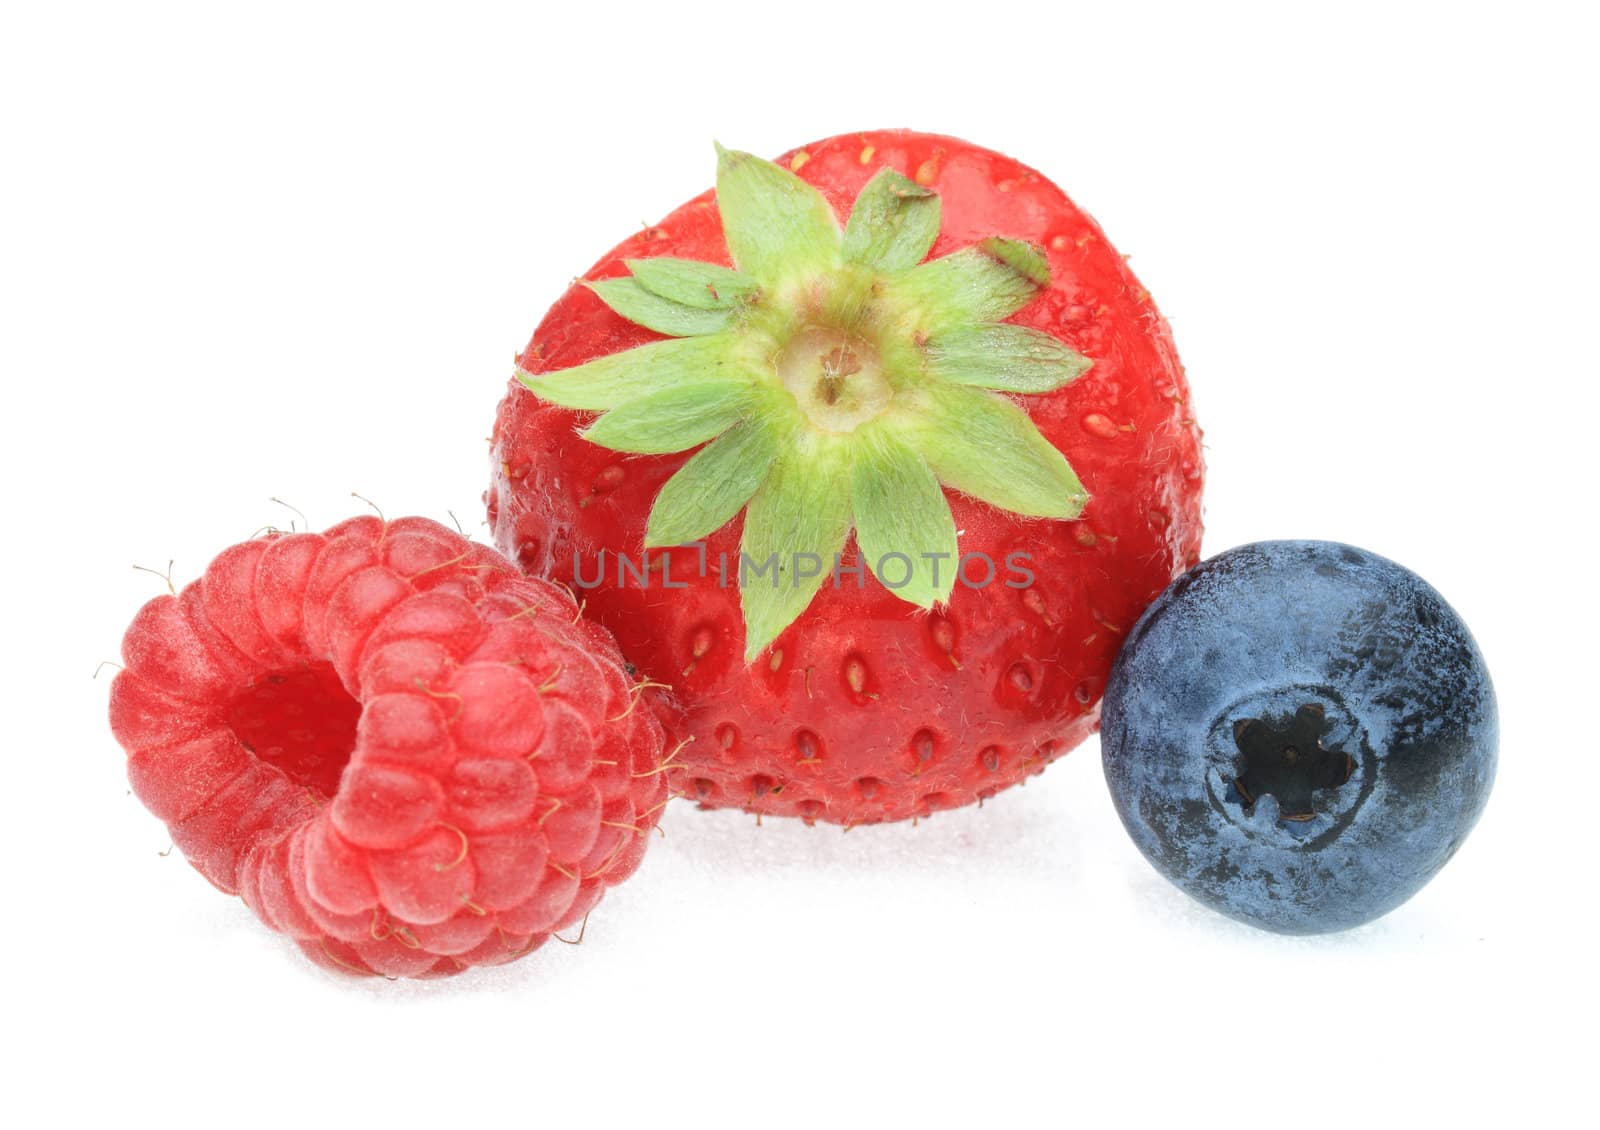 Three berry fruit photographed in a studio against a white background.